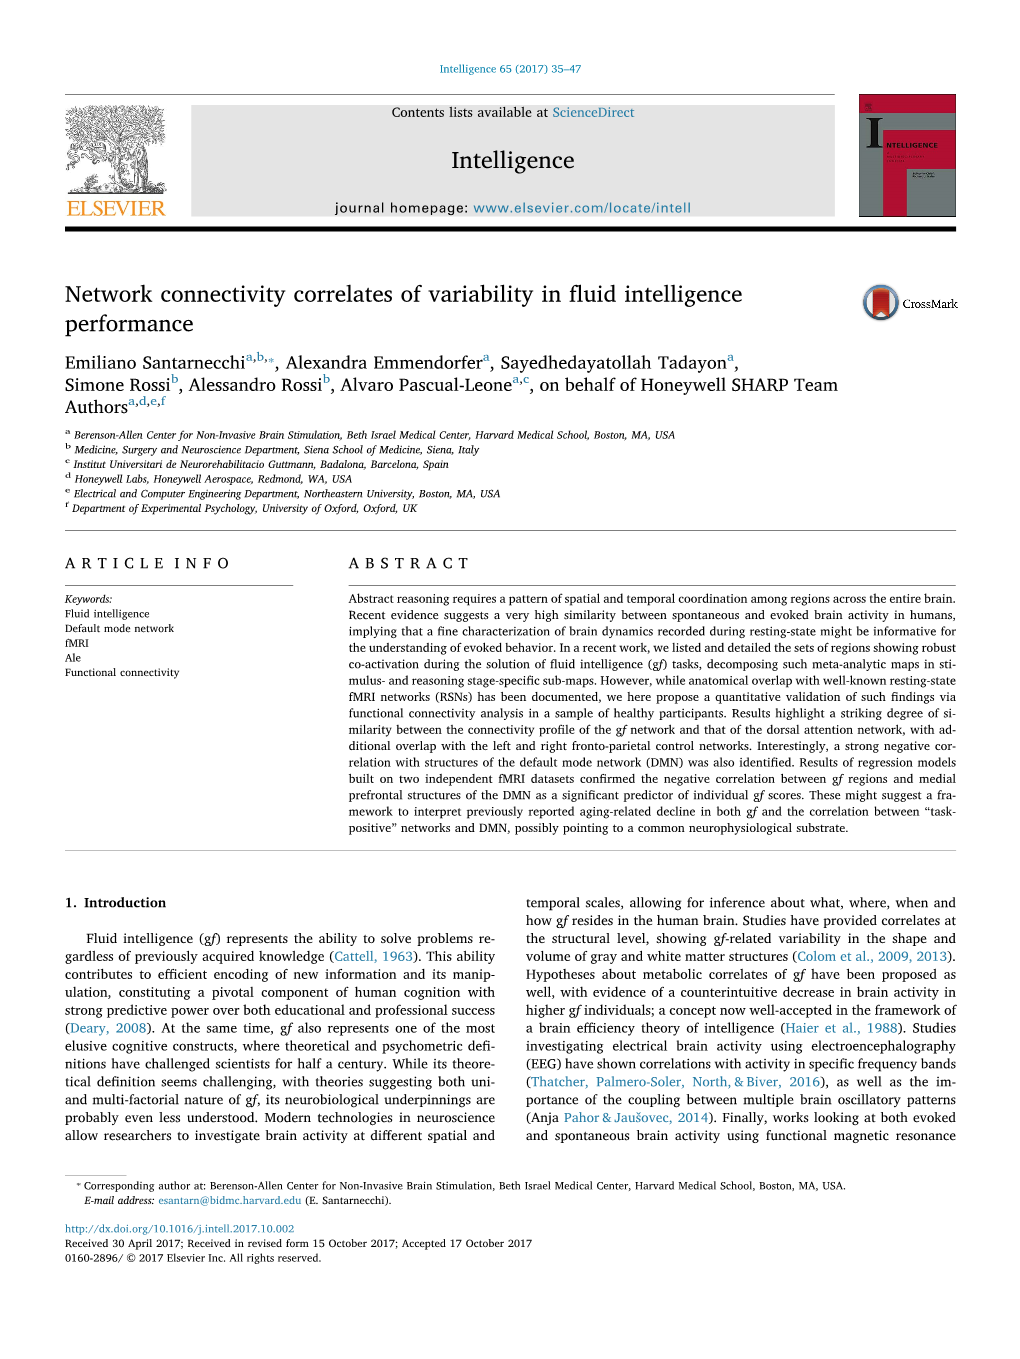 Network Connectivity Correlates of Variability in Fluid Intelligence